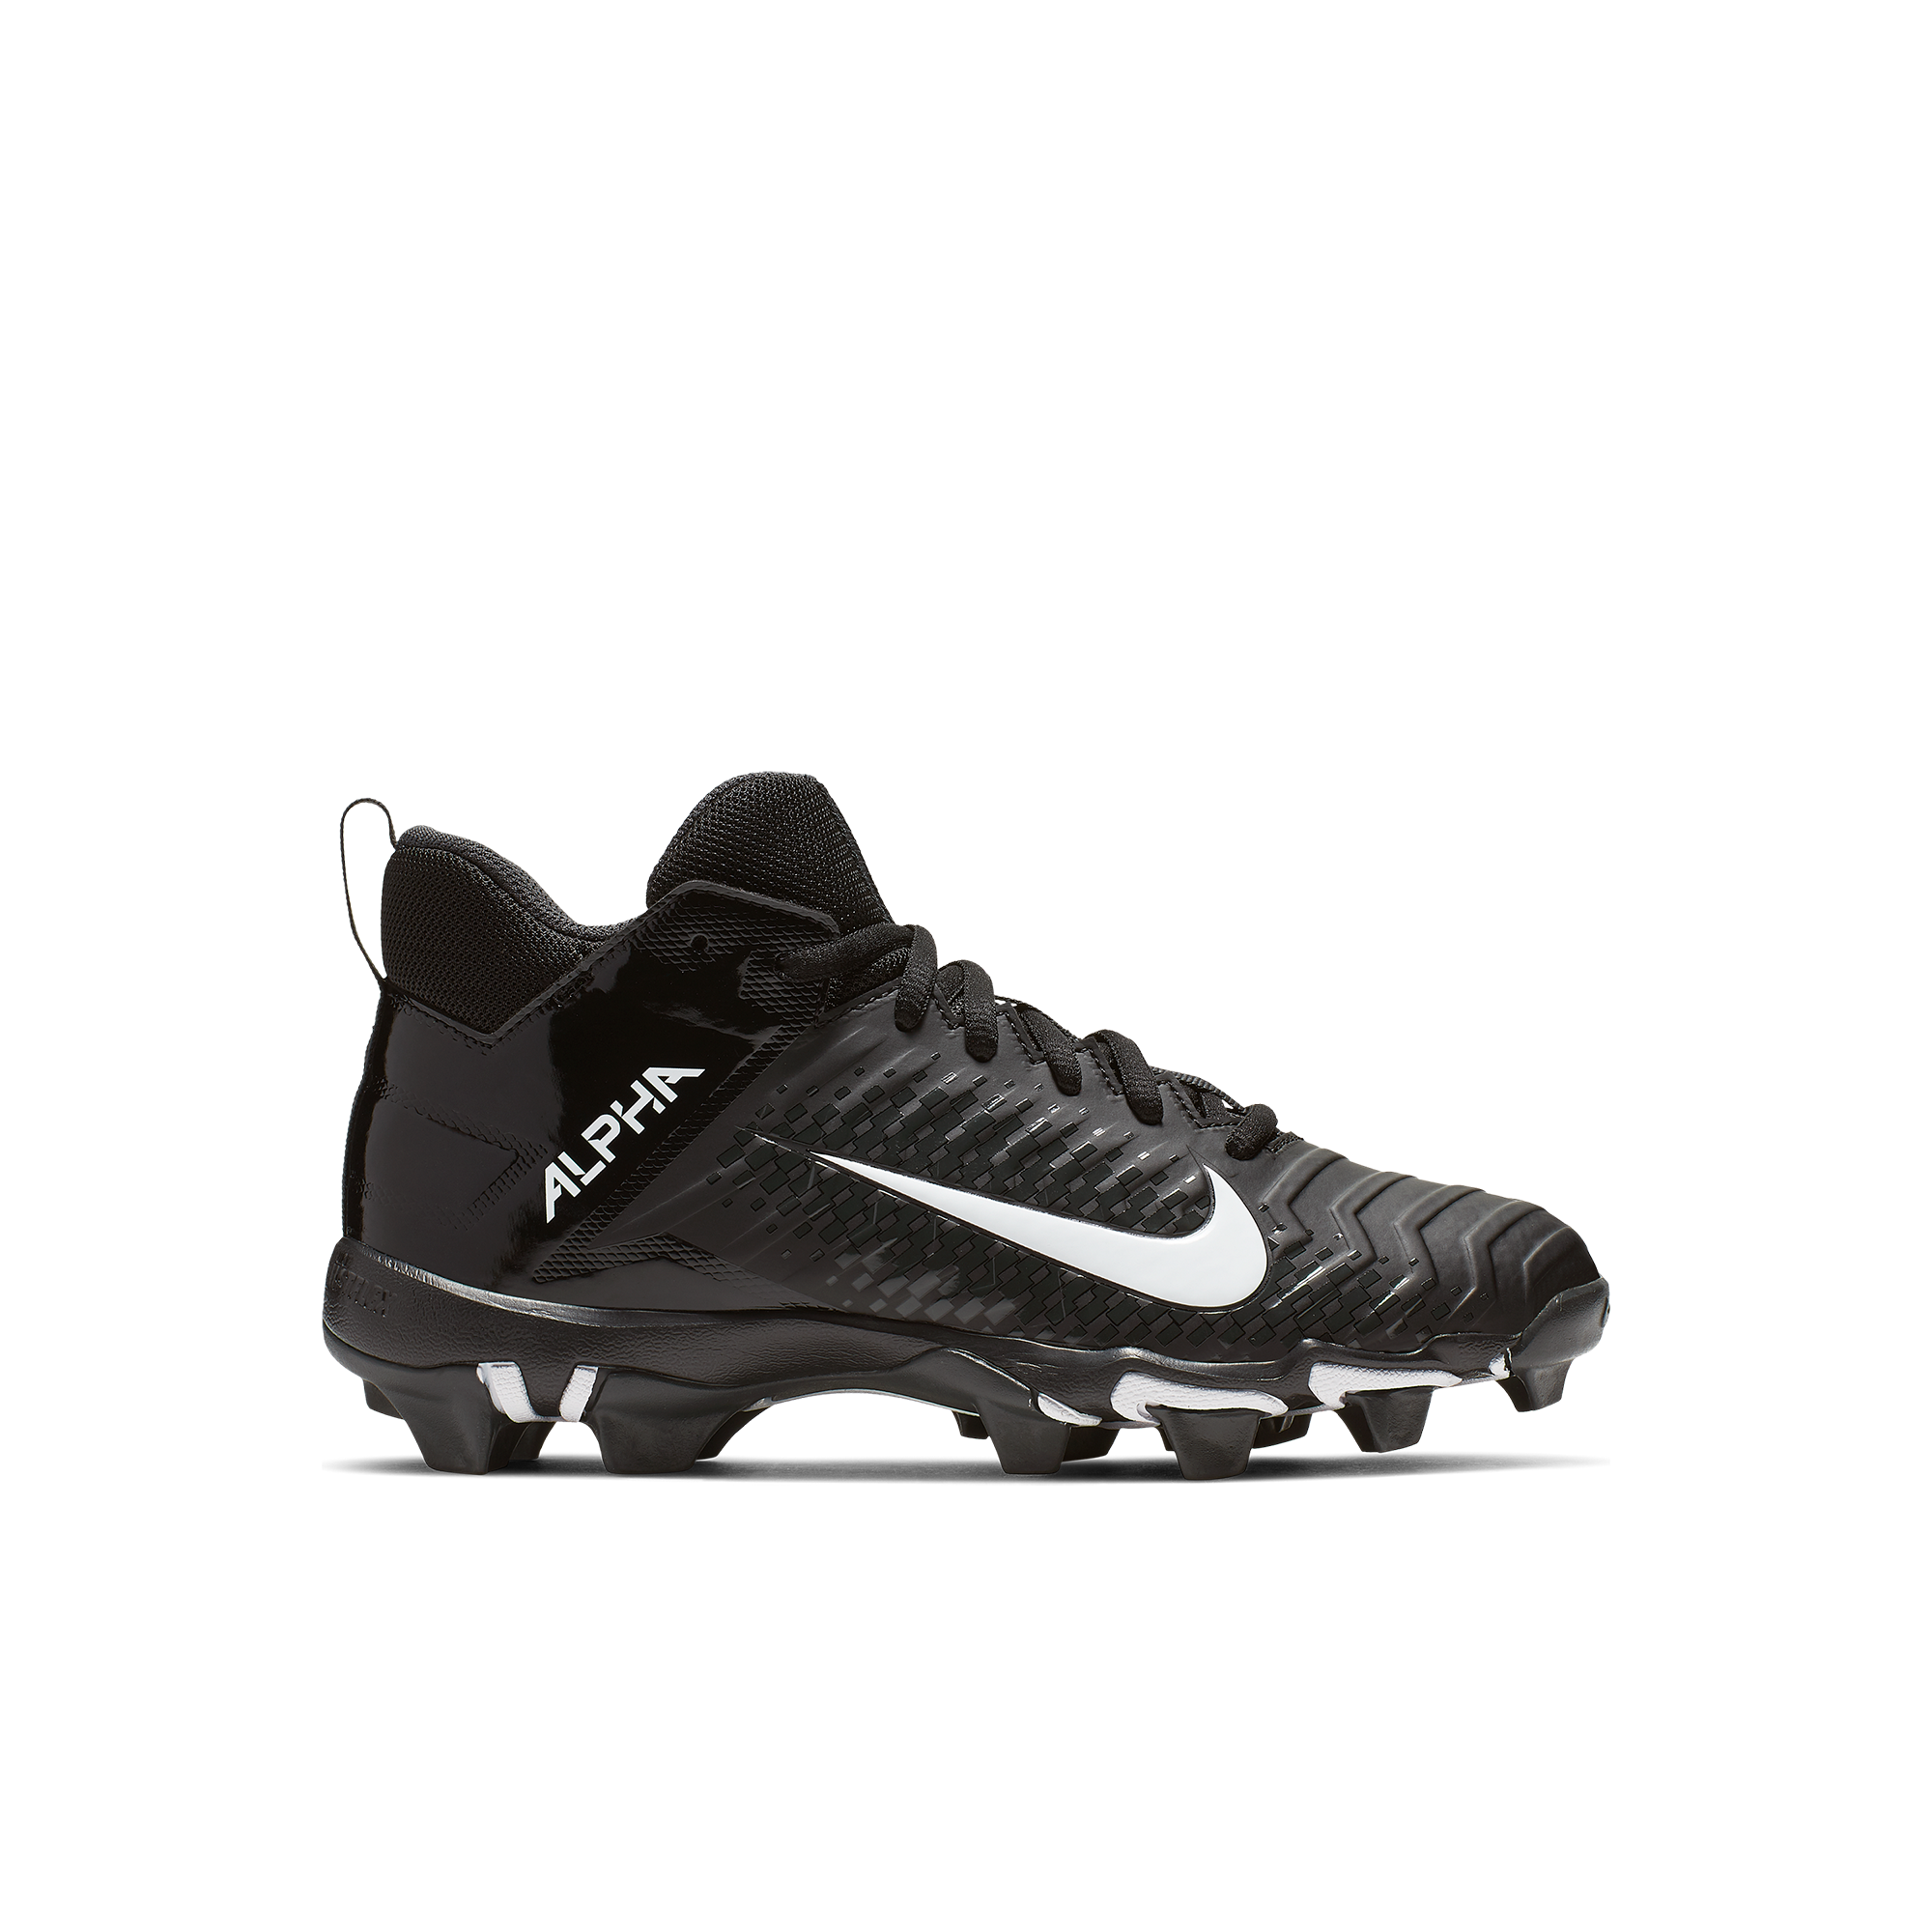 2019 youth football cleats